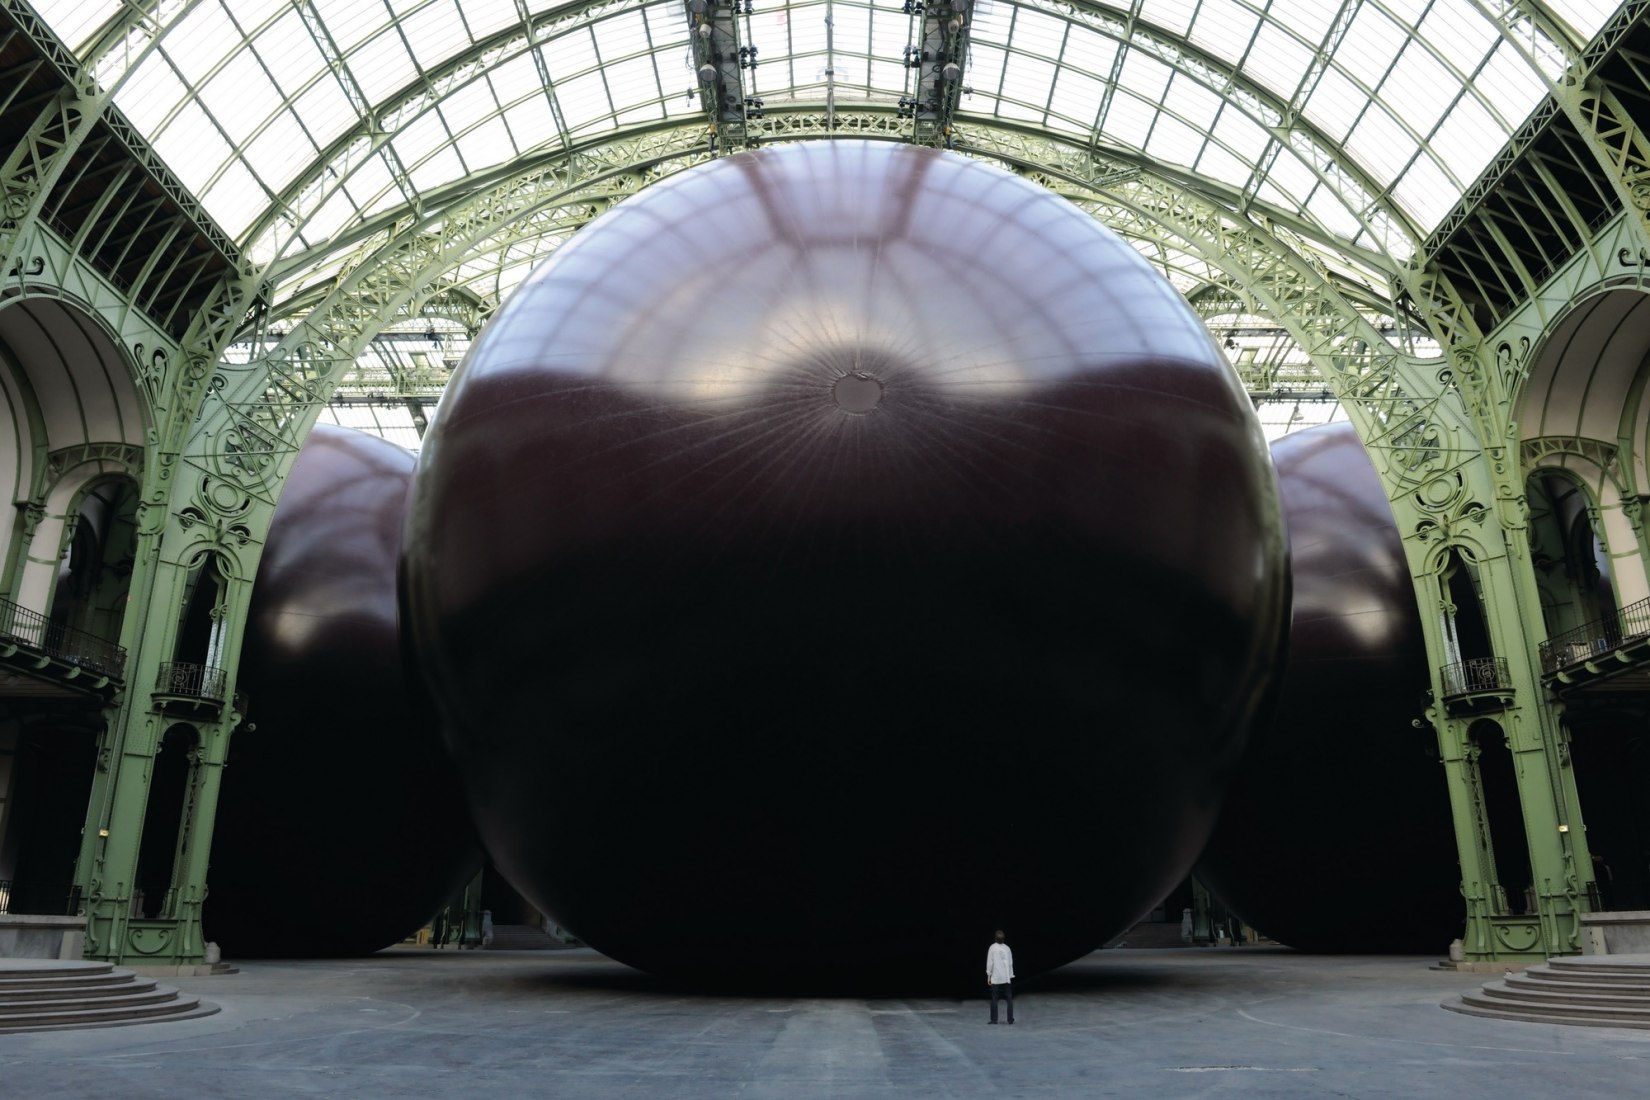 Anish Kapoor, Leviathan (2011), Grand Palais, Paris, France. Images courtesy of the French Ministry of Culture and Communication.